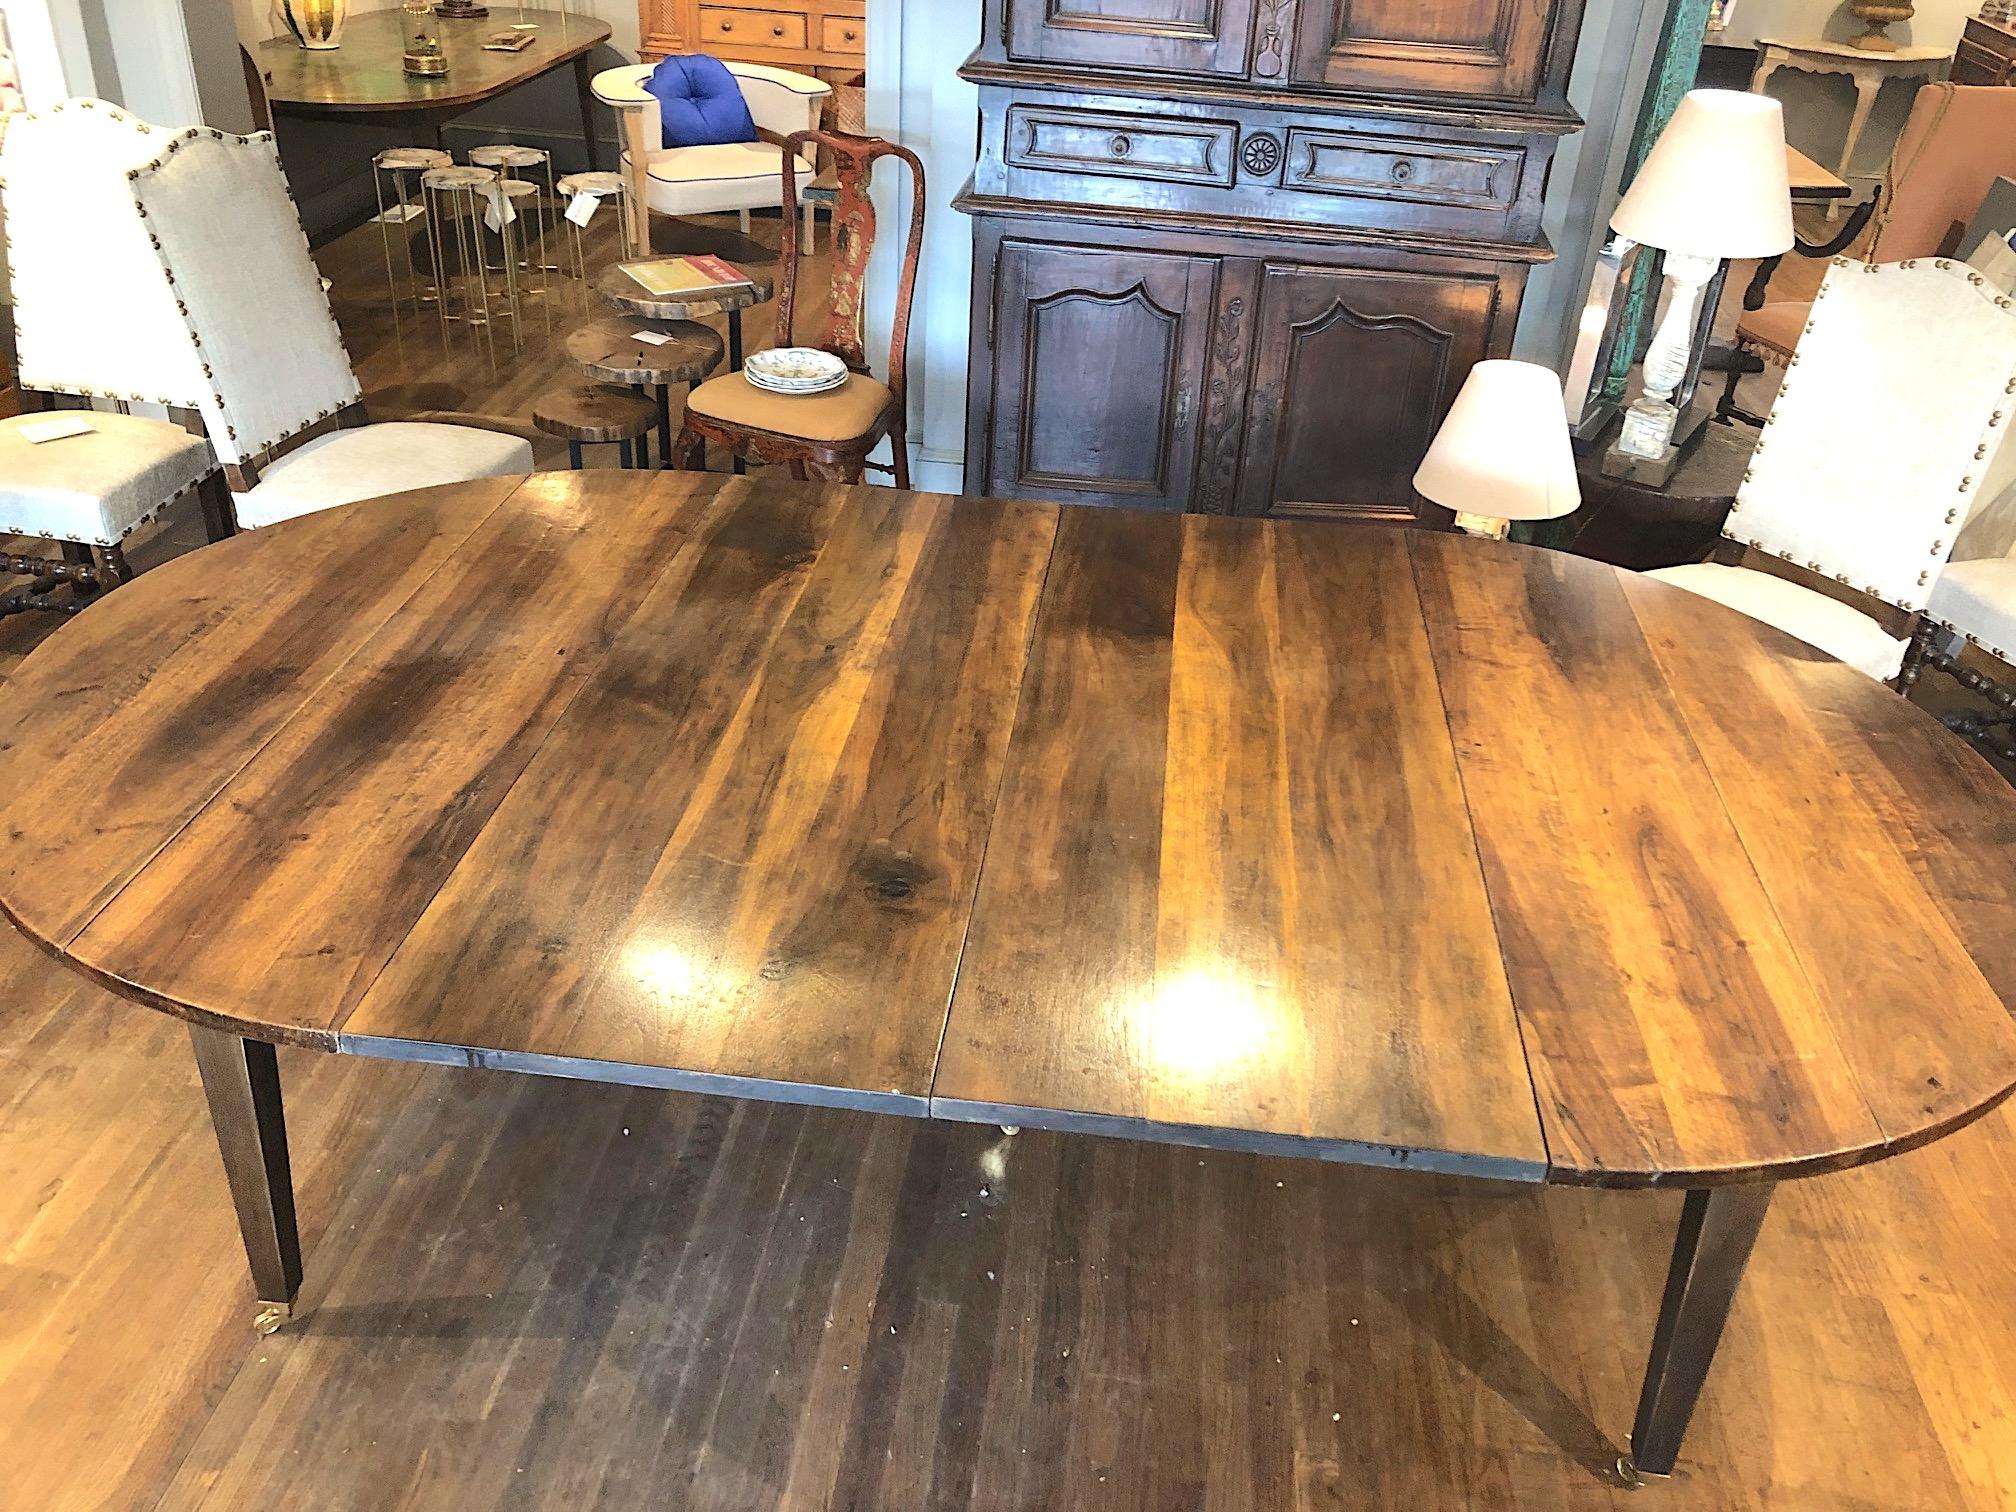 Fine quality 19th century Louis XVI style French Provincial extending dining table made of beautifully patinated and very highly figured Circassian walnut with five straight tapering legs and casters. A large oval table extending with two leaves